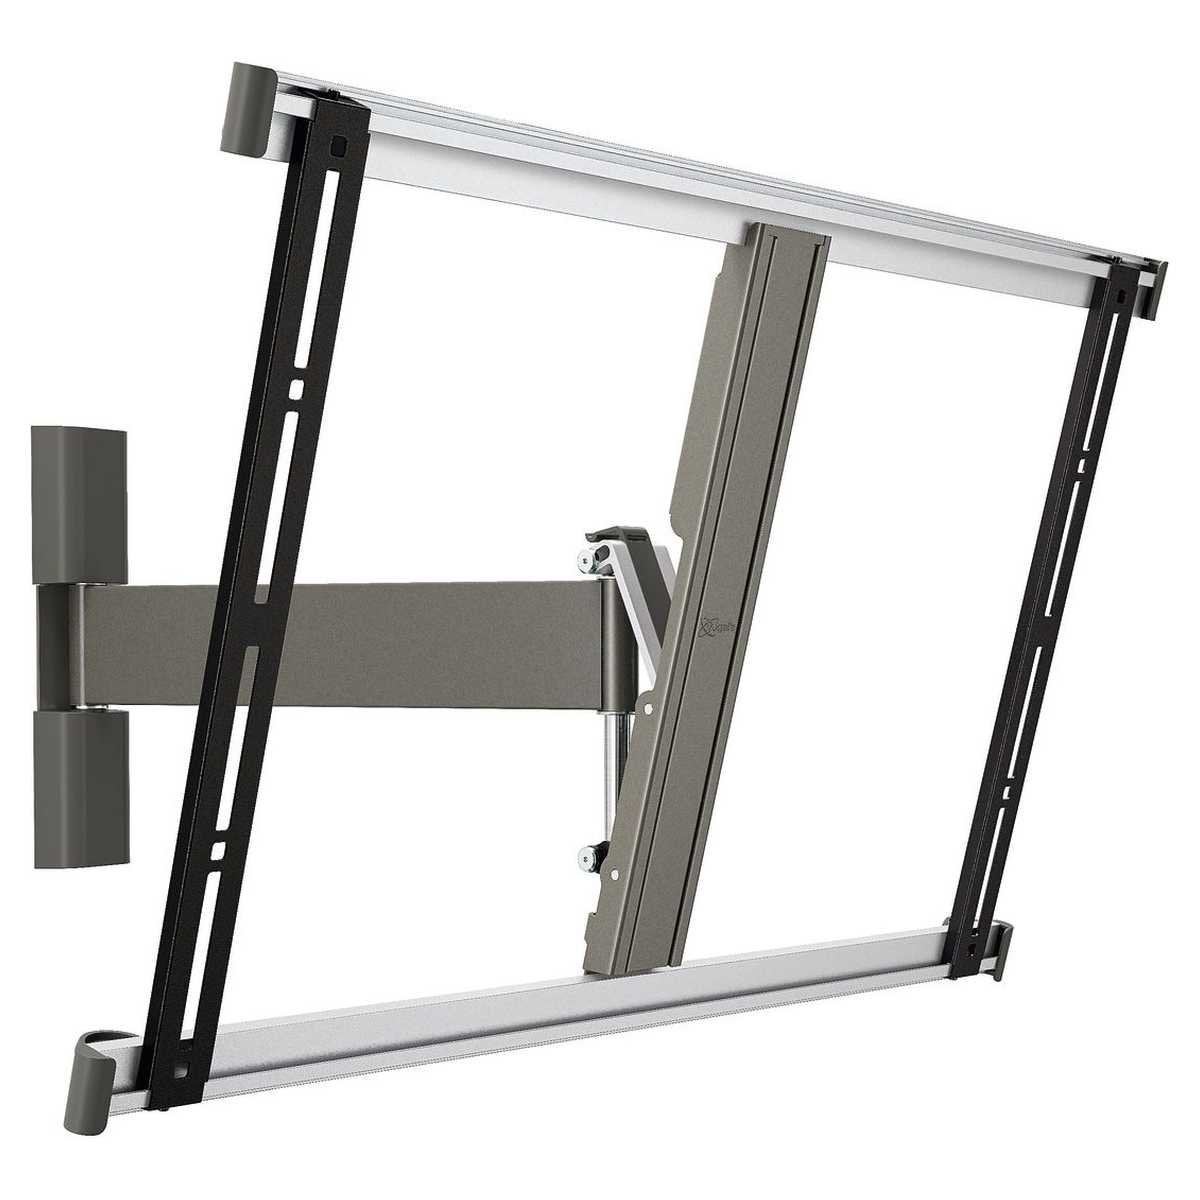 Image of Vogel's THIN325 UltraThin Full-Motion TV Wall Mount for 40 to 65 Inch TVs Grey